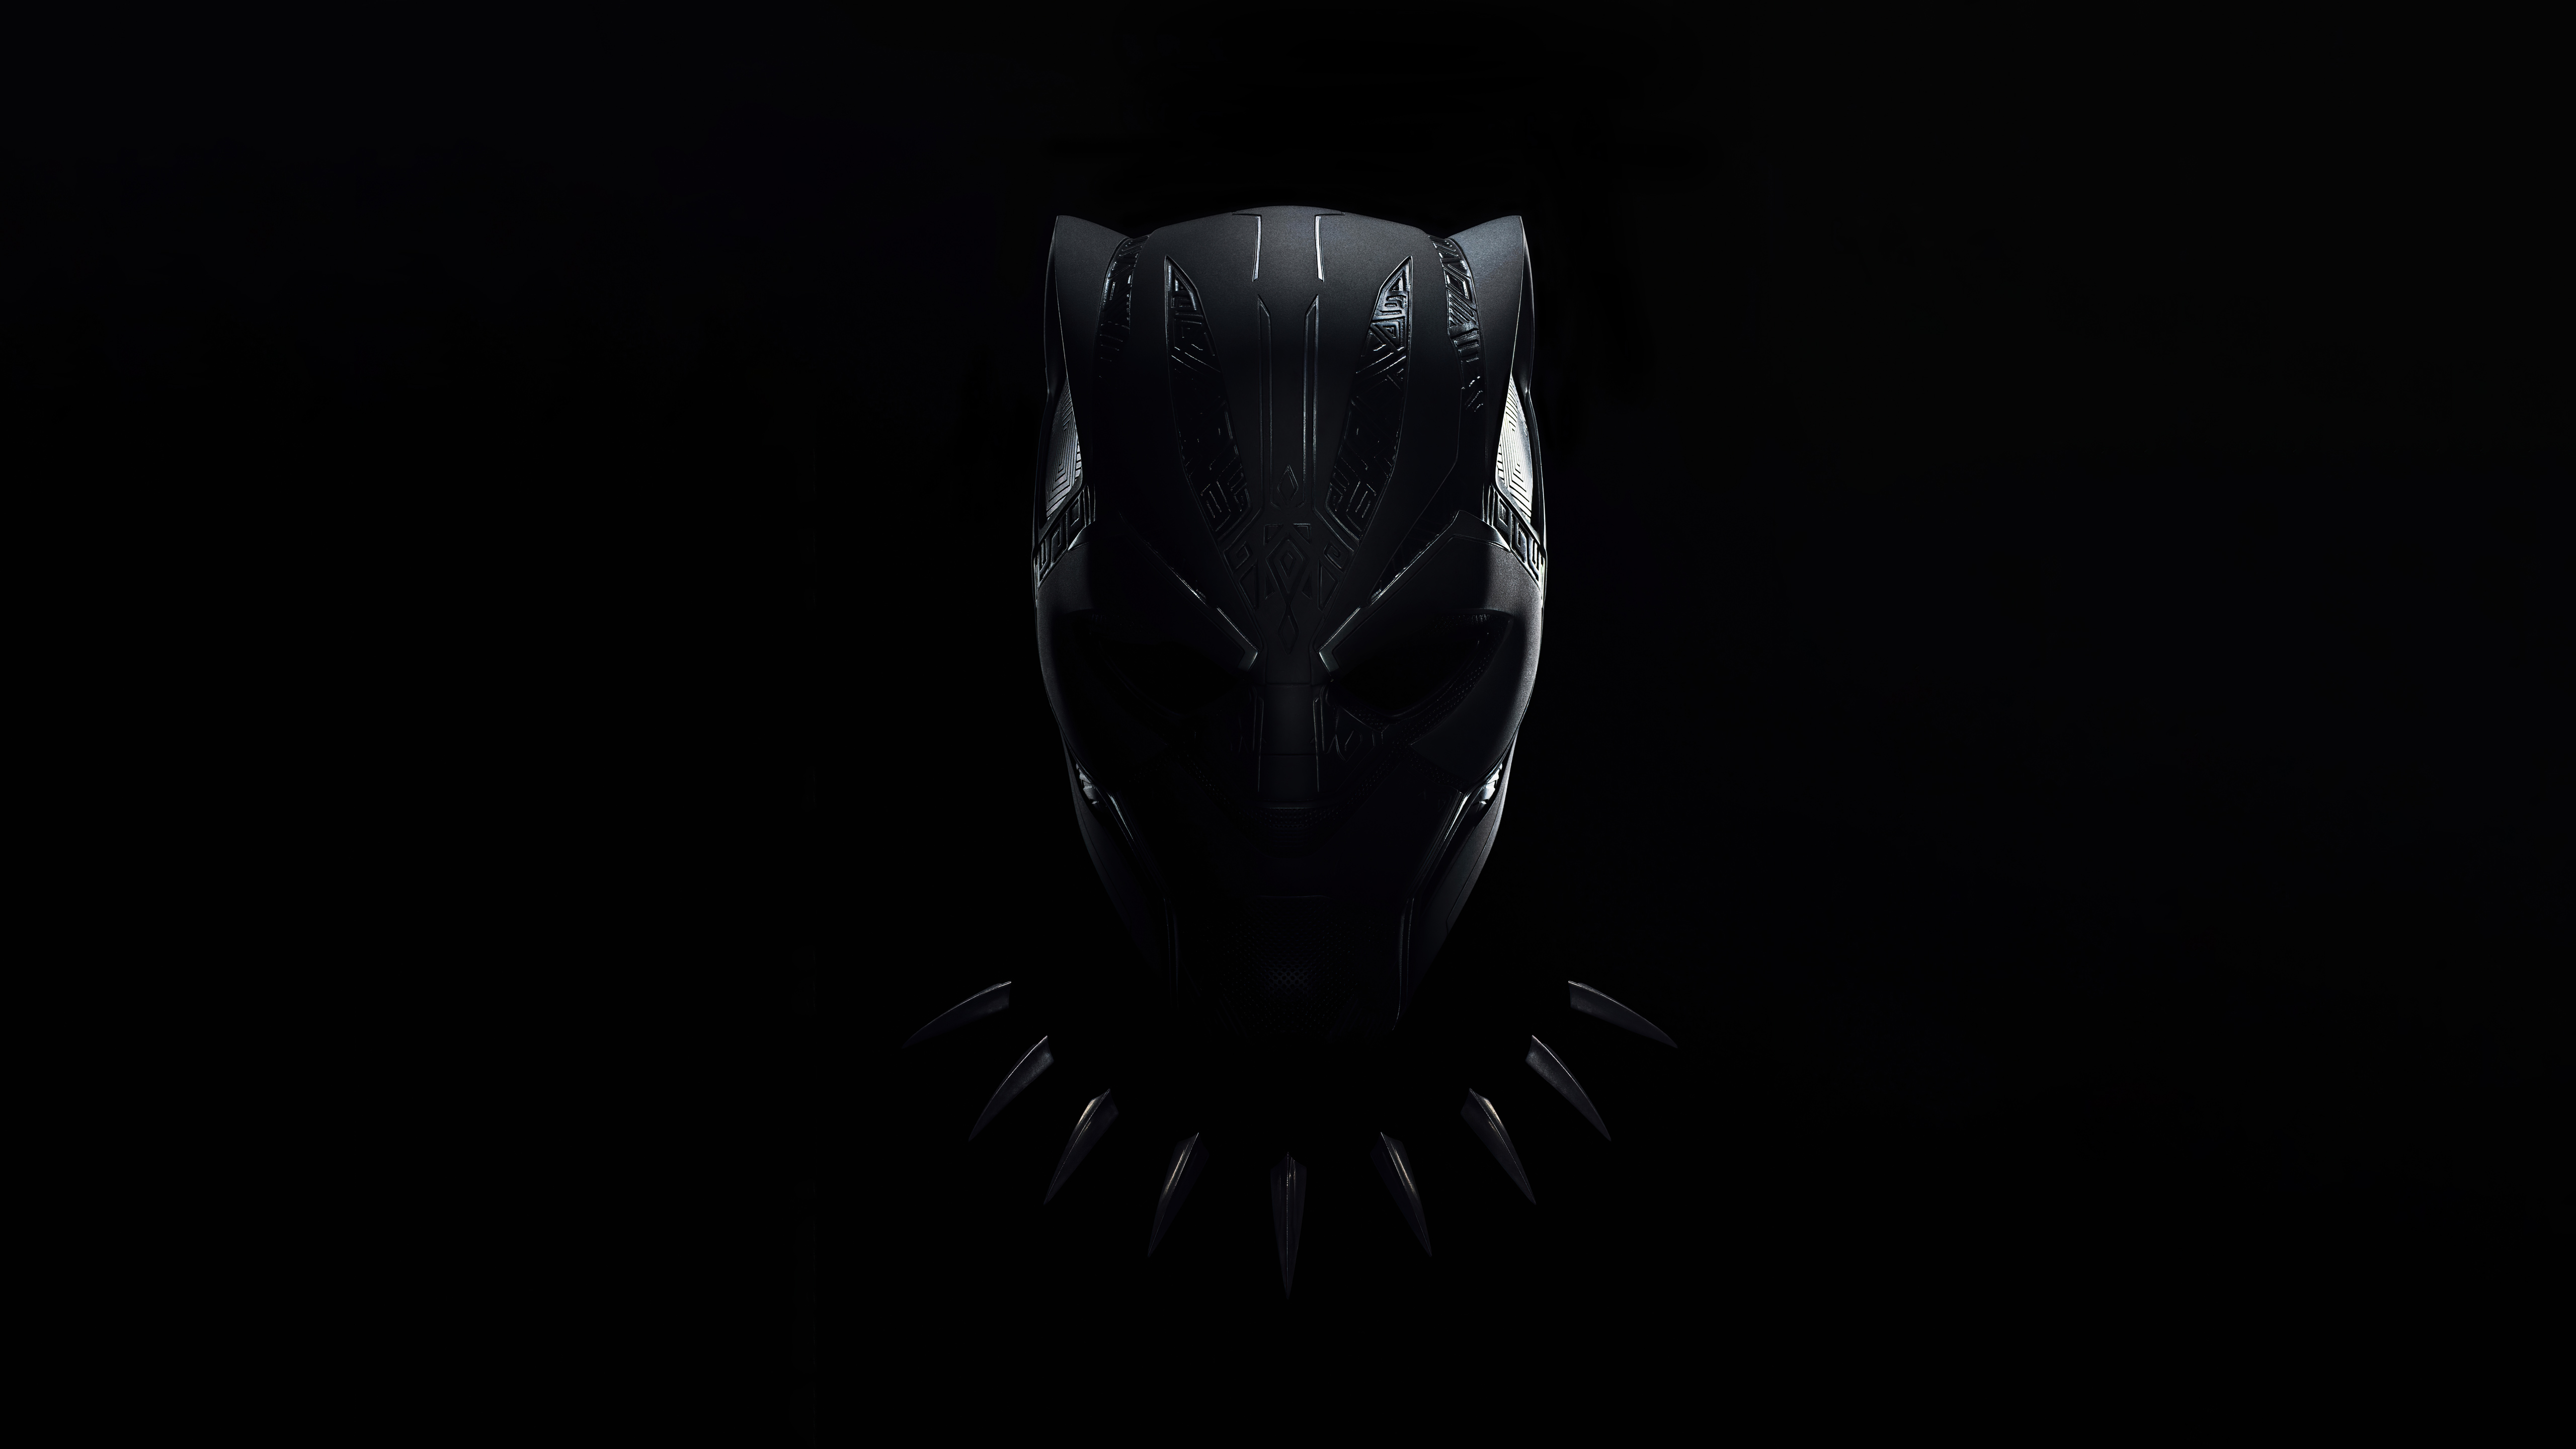 Black Panther 2 Wallpapers  Top 45 Best Black Panther 2 Wallpapers Download